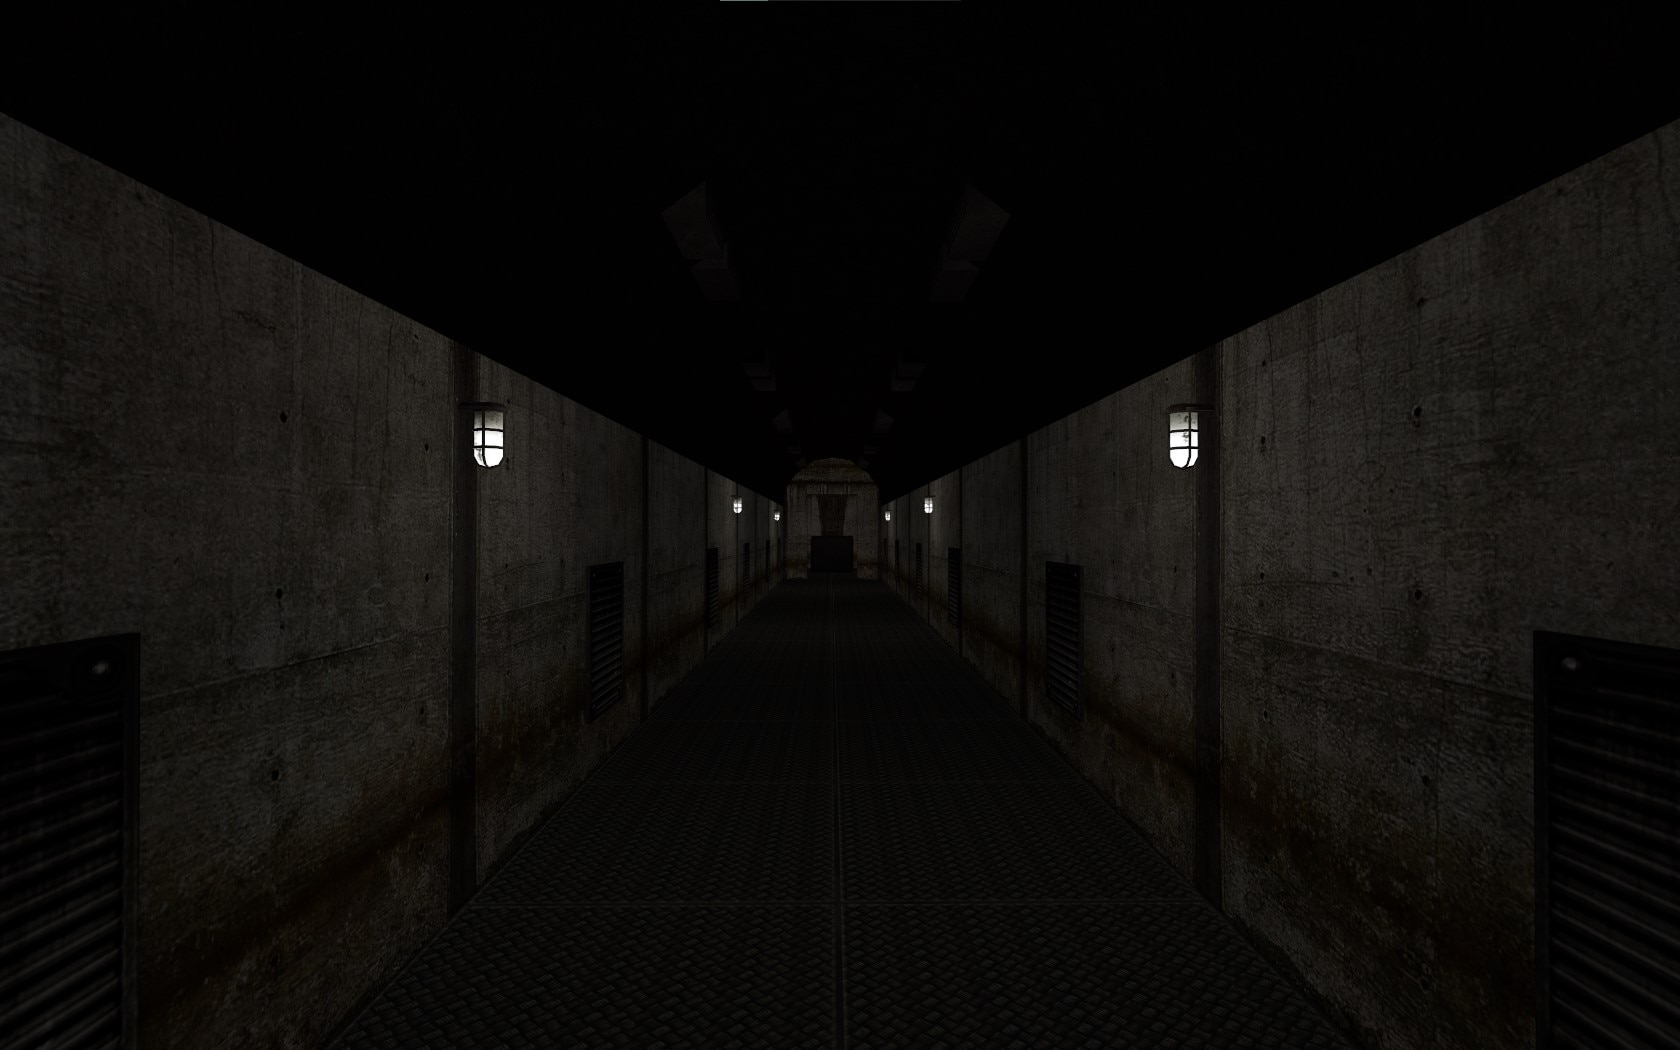 1.1.5] M.A.V when entering SCP-895/SCP-079 chambers - Undertow Games Forum